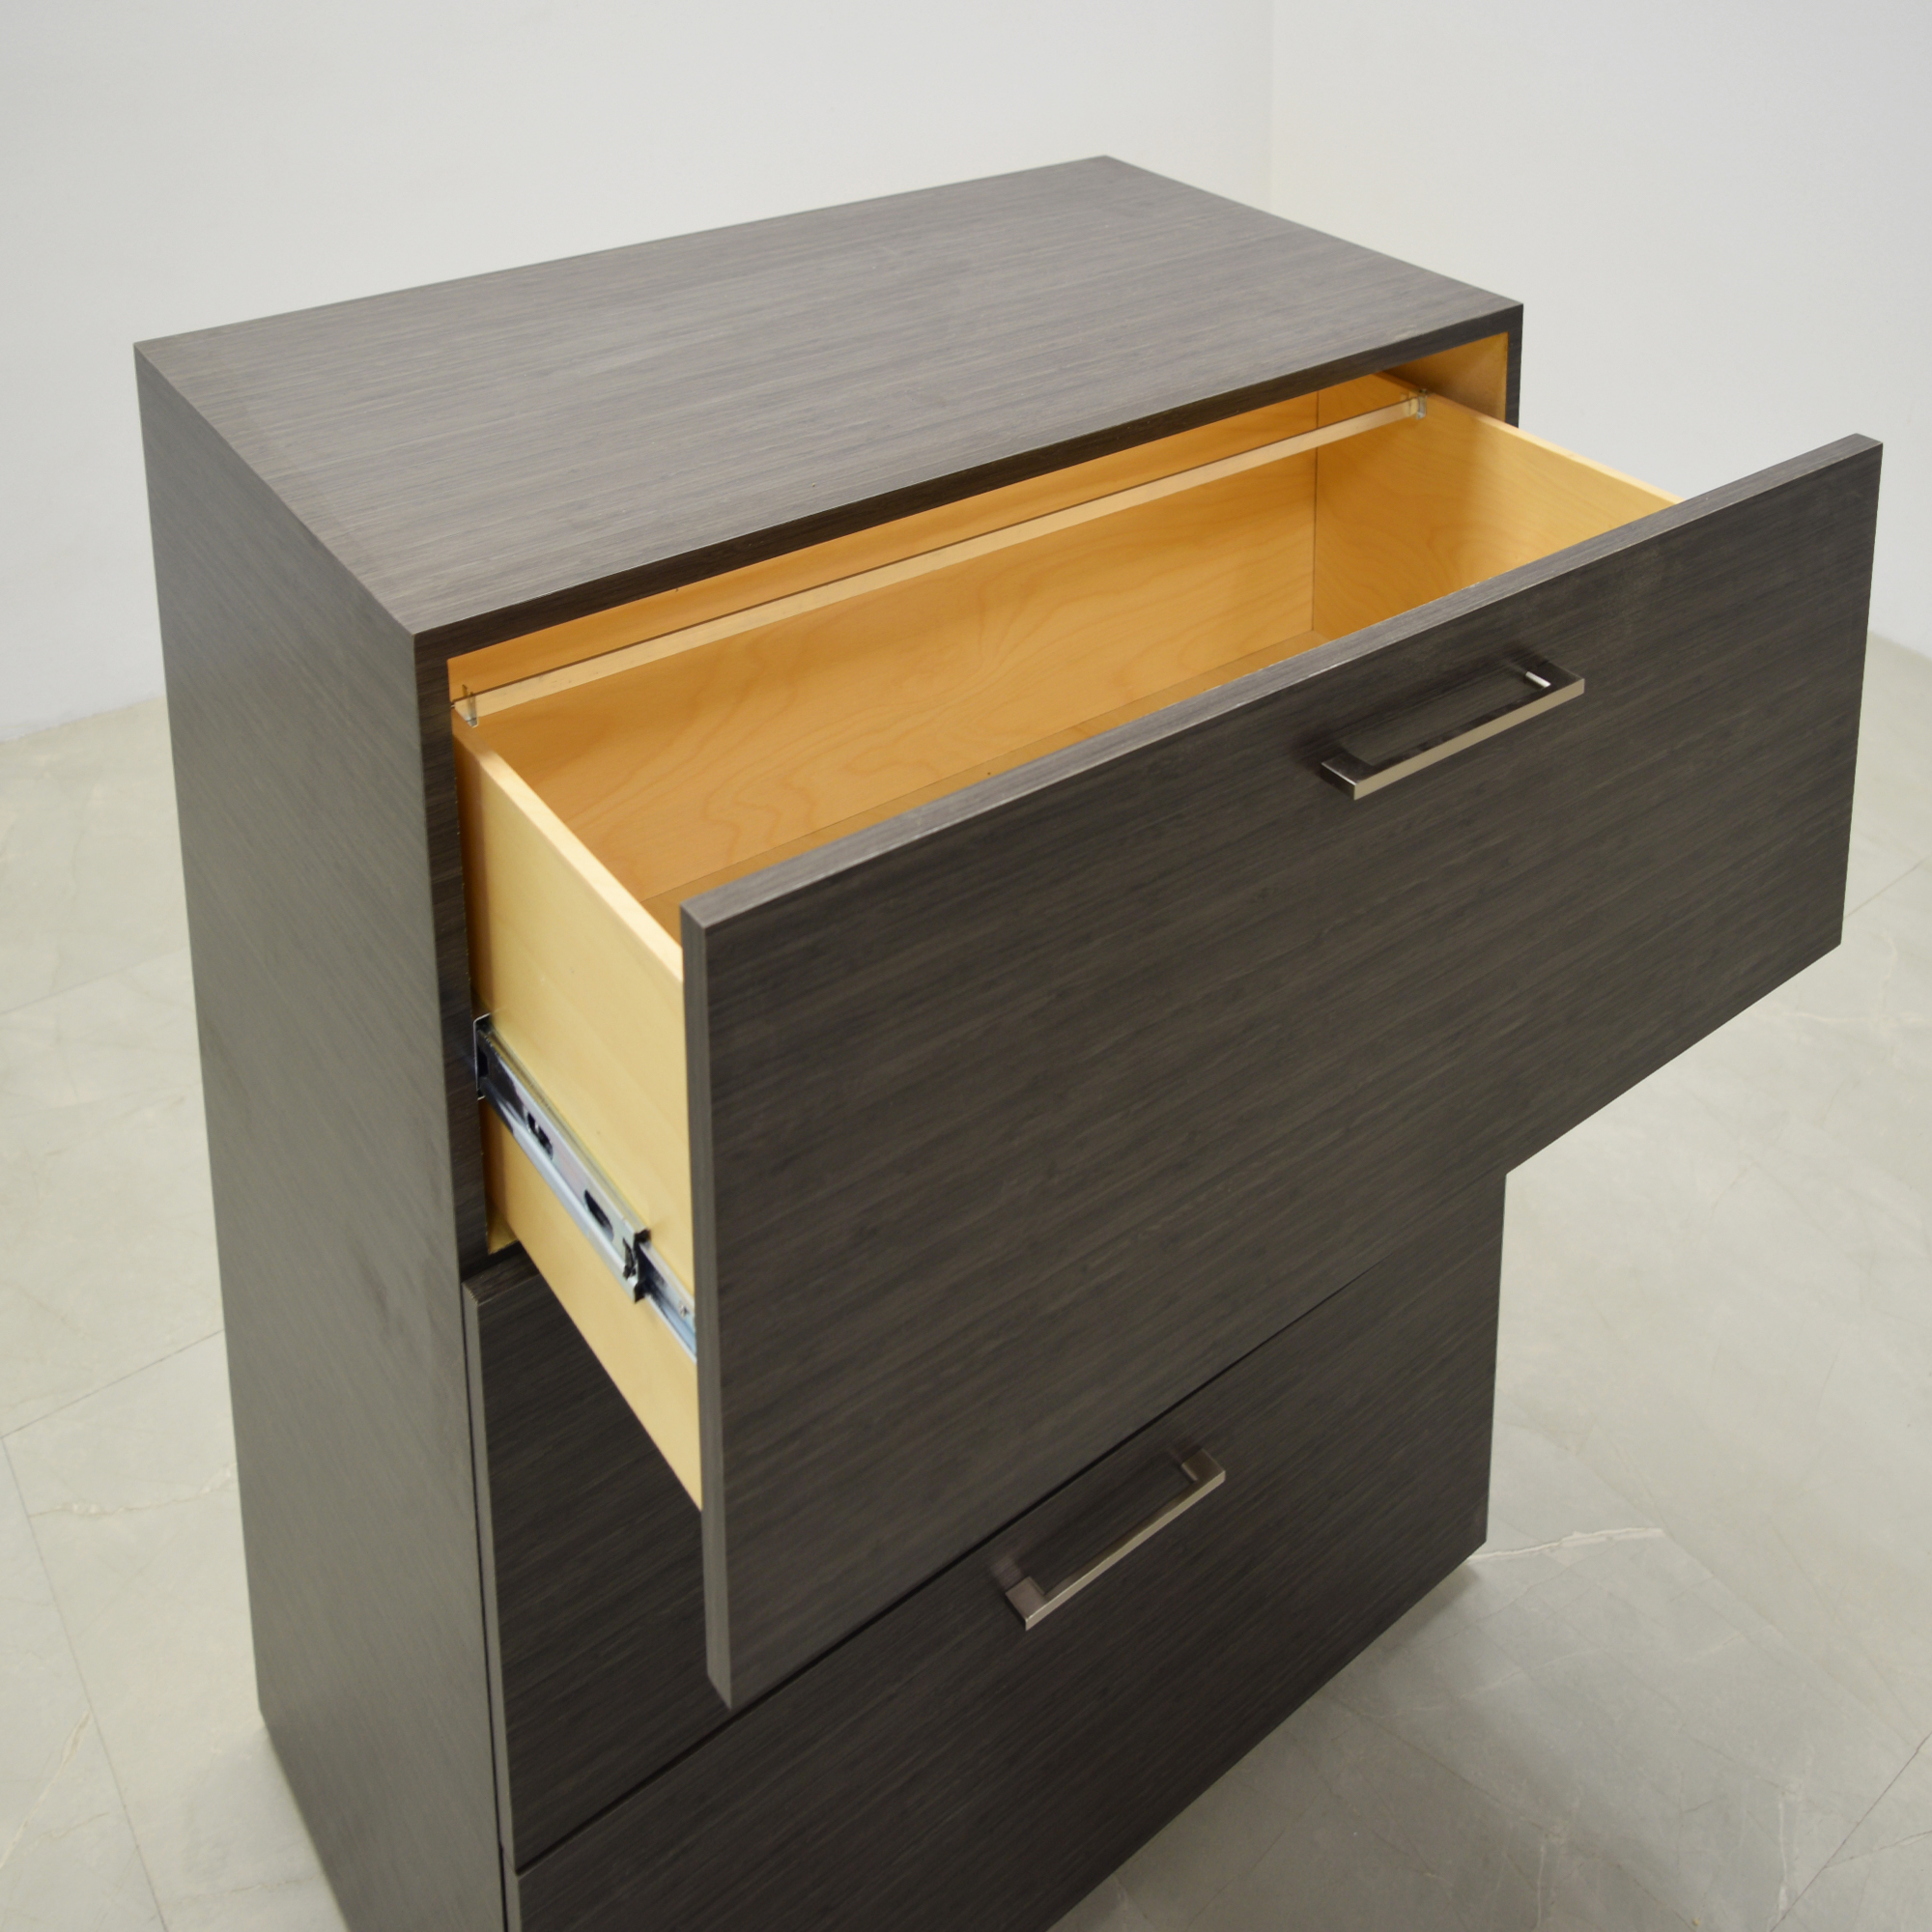 Naples Lateral File Cabinet in asian night (discontinued) laminate, shown here.